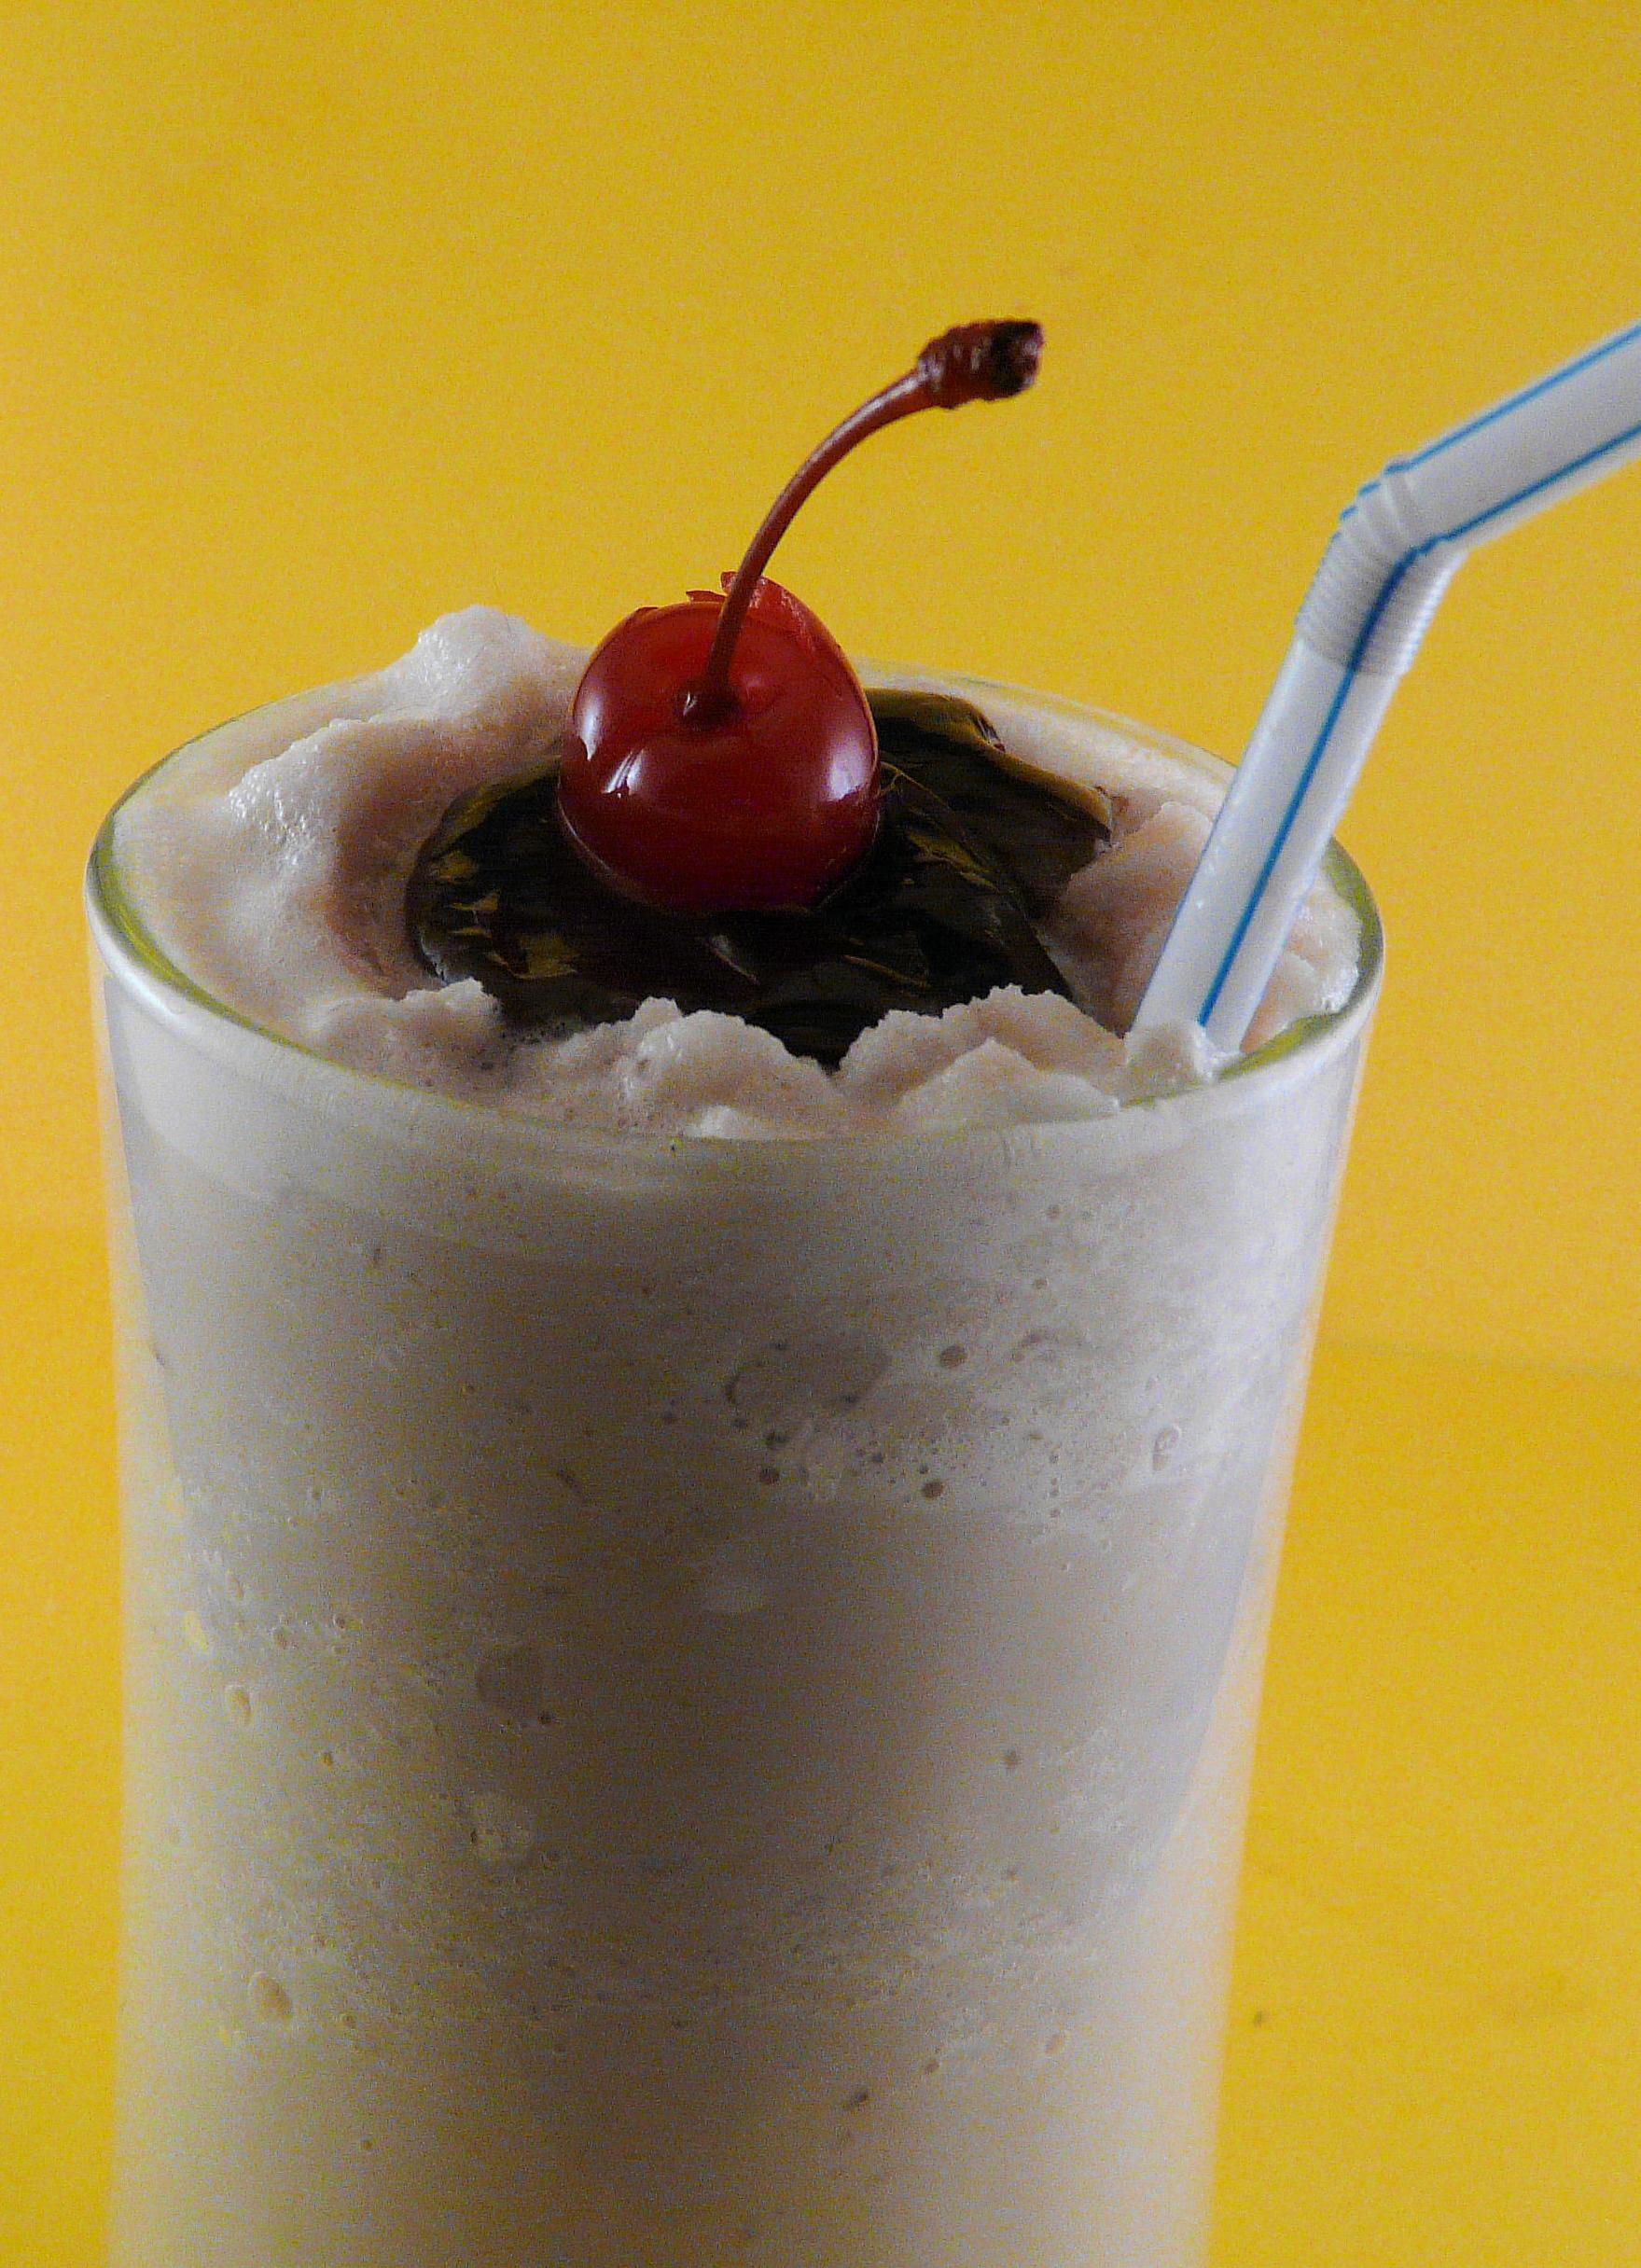  Ready to shake things up with this delicious coffee shake?